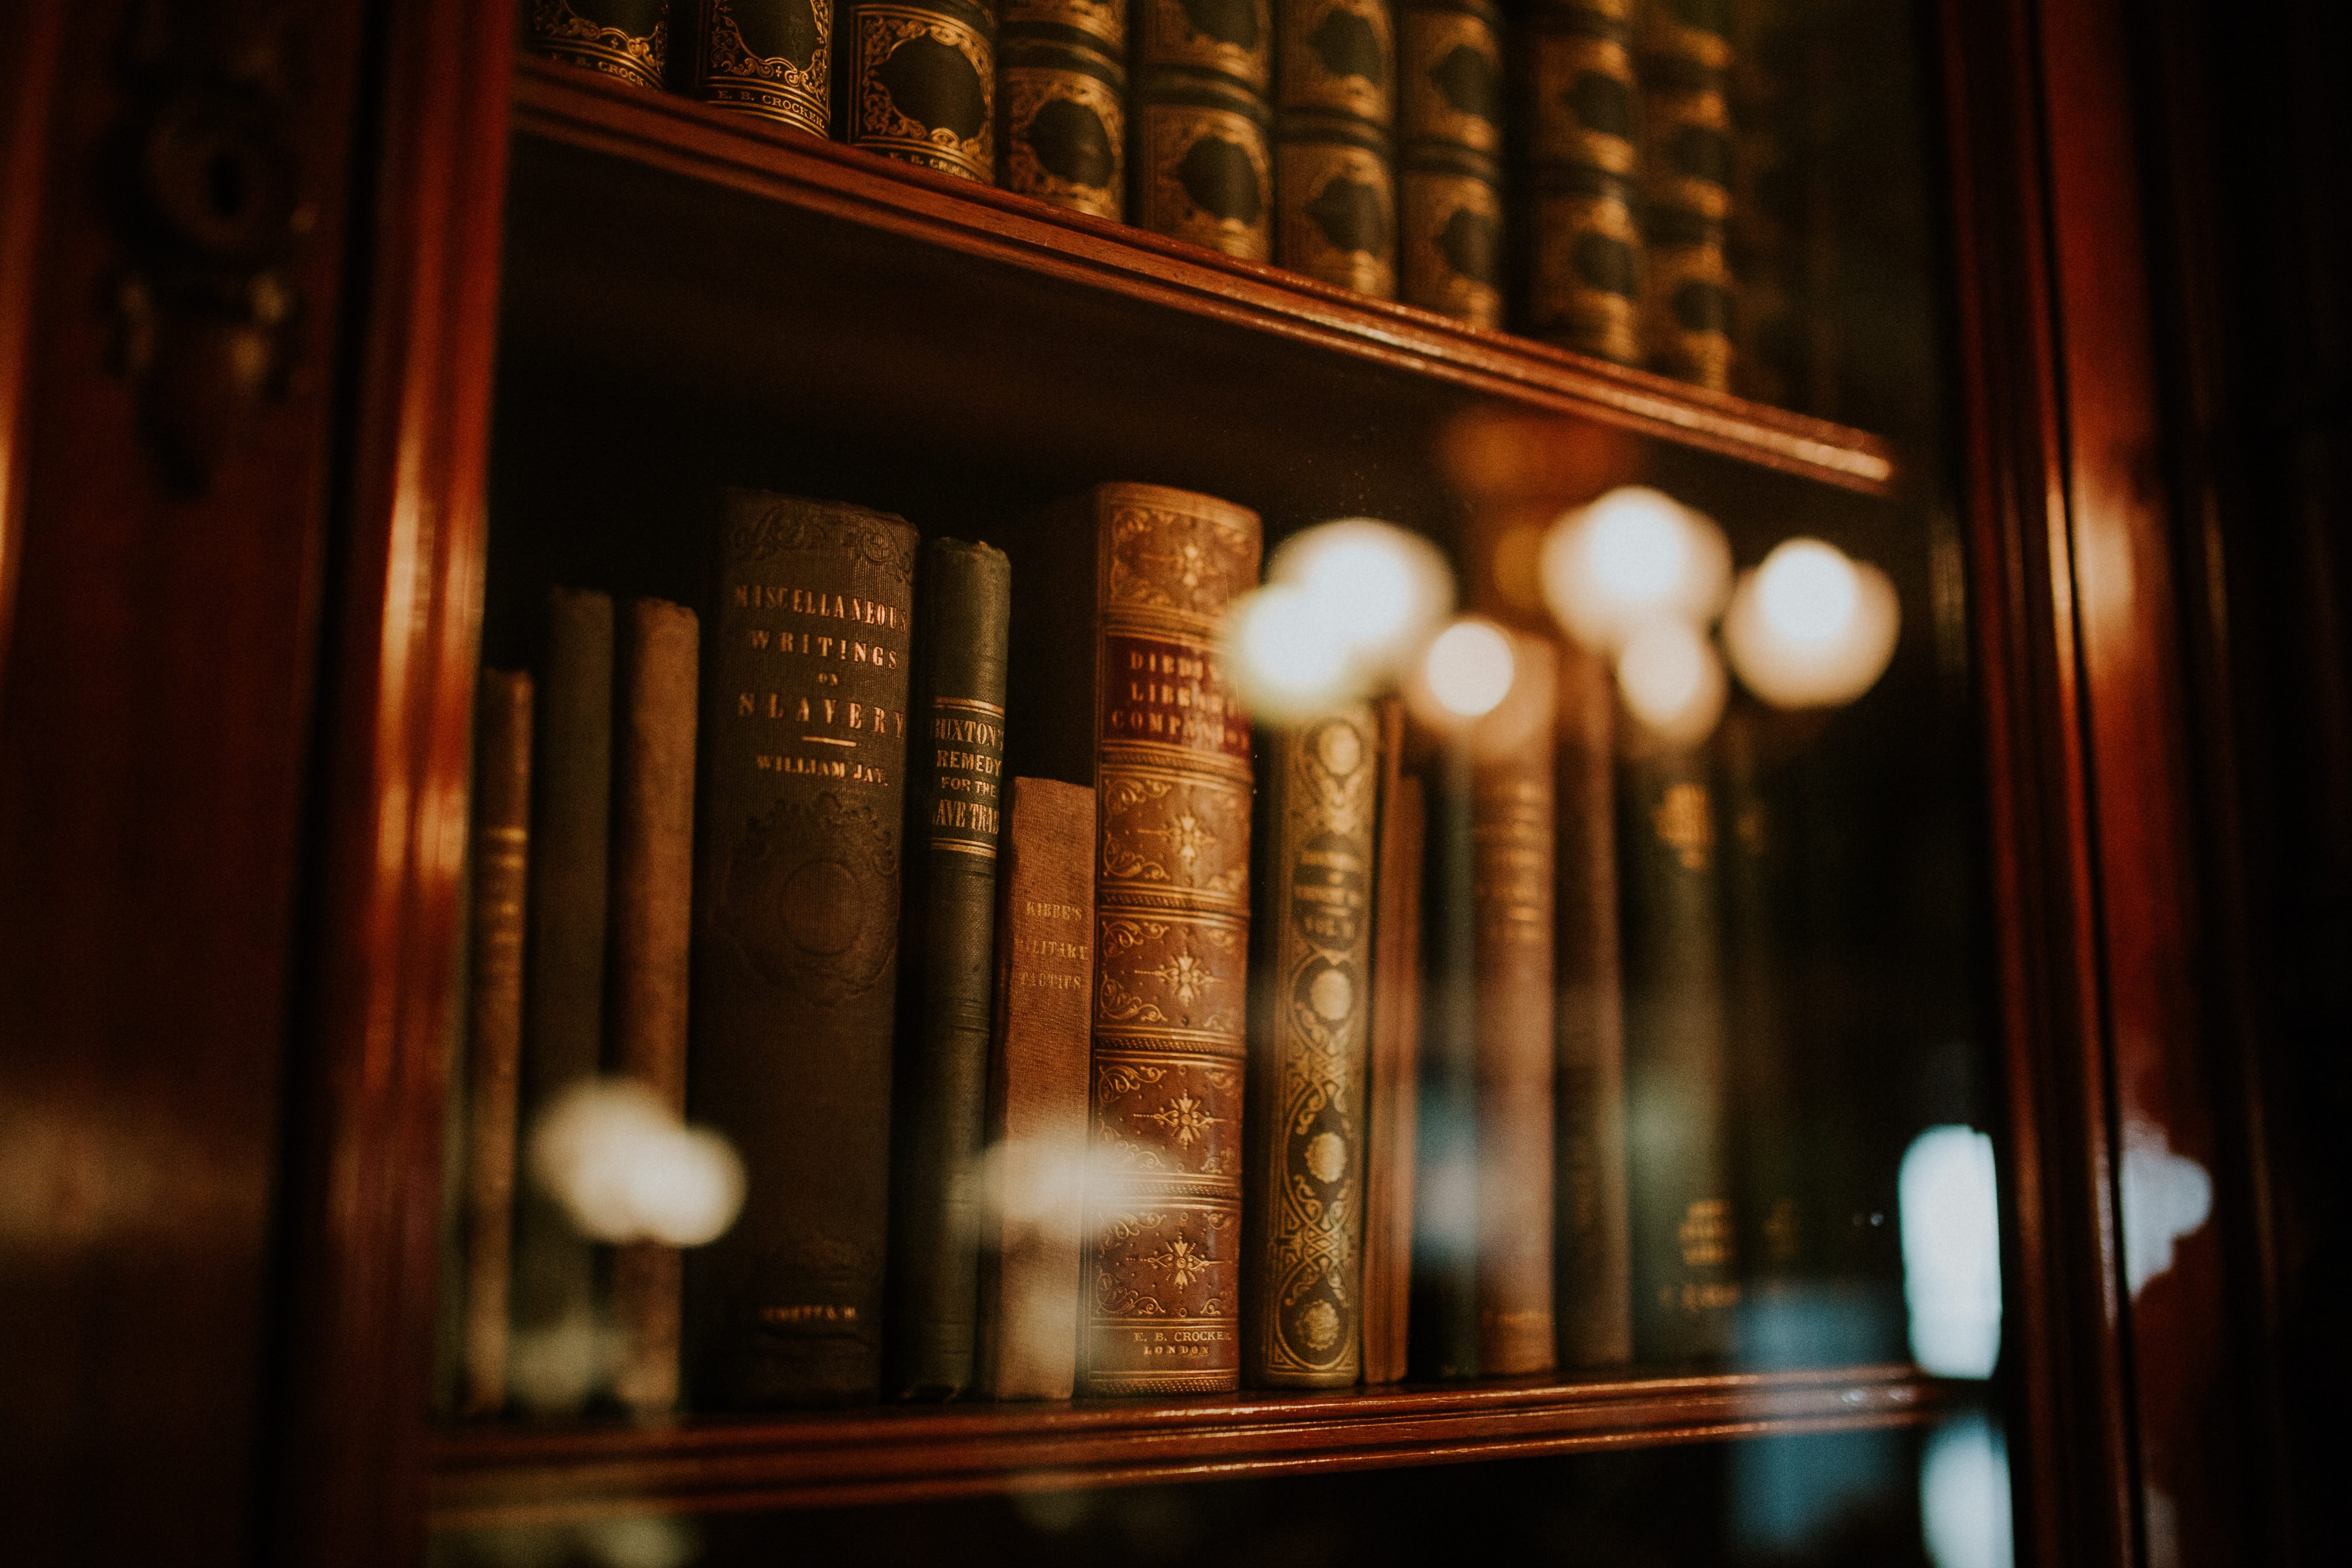 Wooden bookcase with glass door and old books; image by Clarisse Meyer, via Unsplash.com.